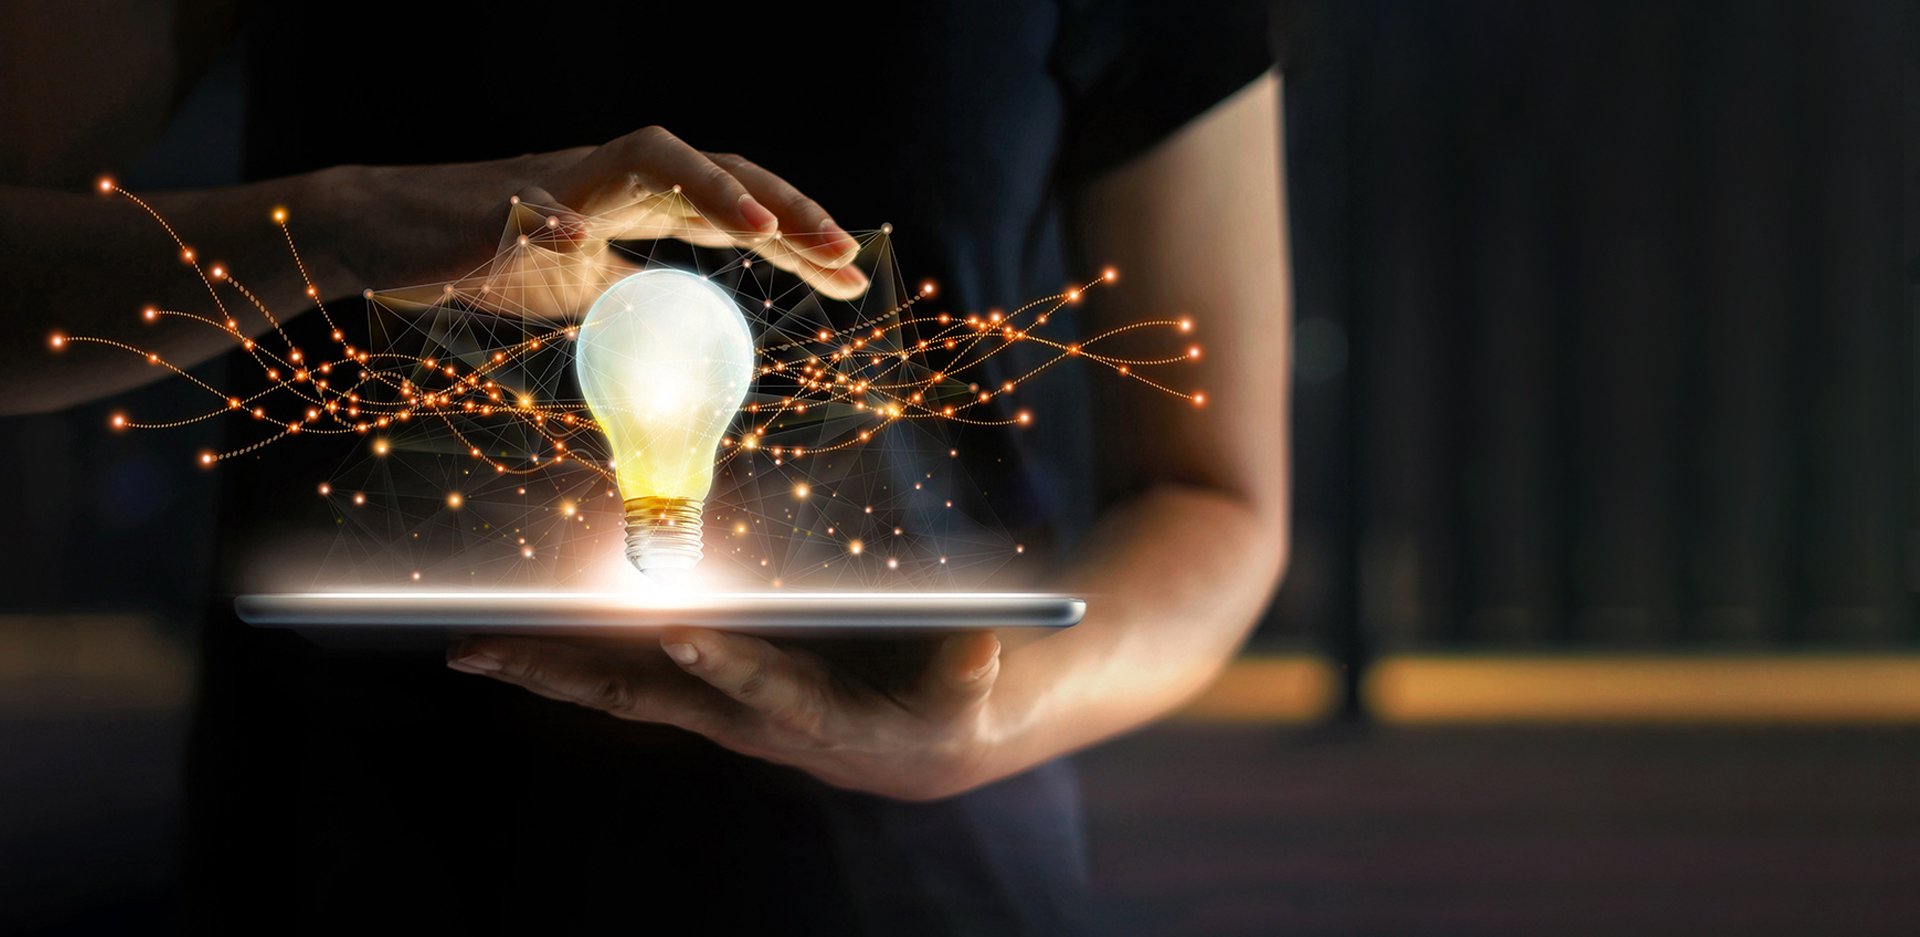 Image of a person conjuring a networked lightbulb from an iPad